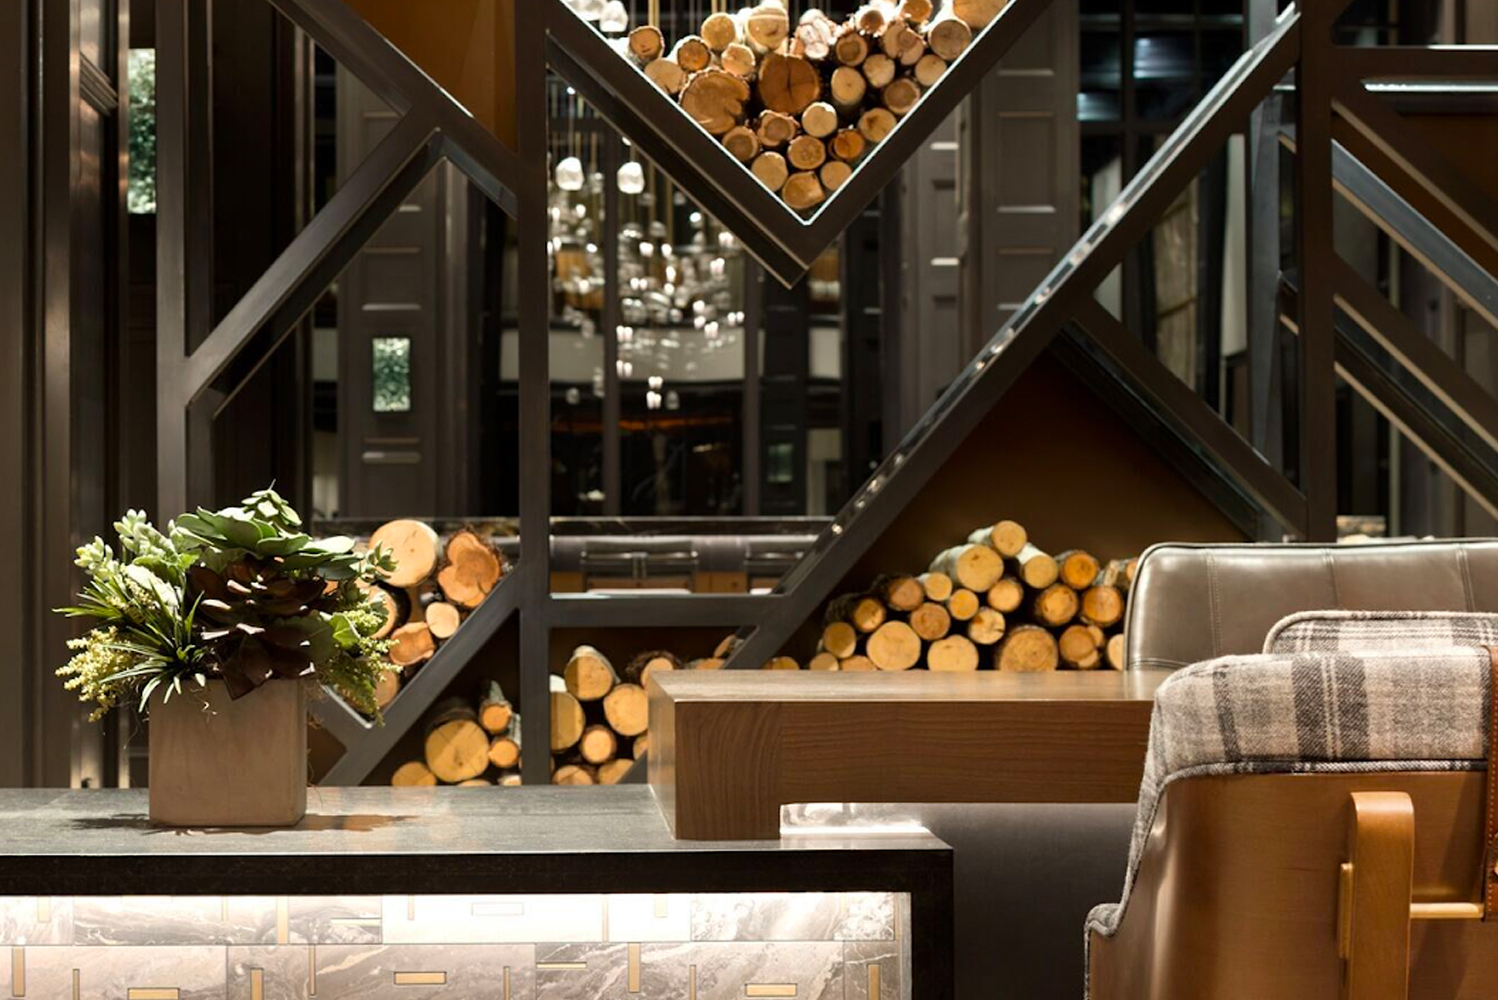 The Park Hyatt Beaver Creek Resort and Spa reopened after a full renovation